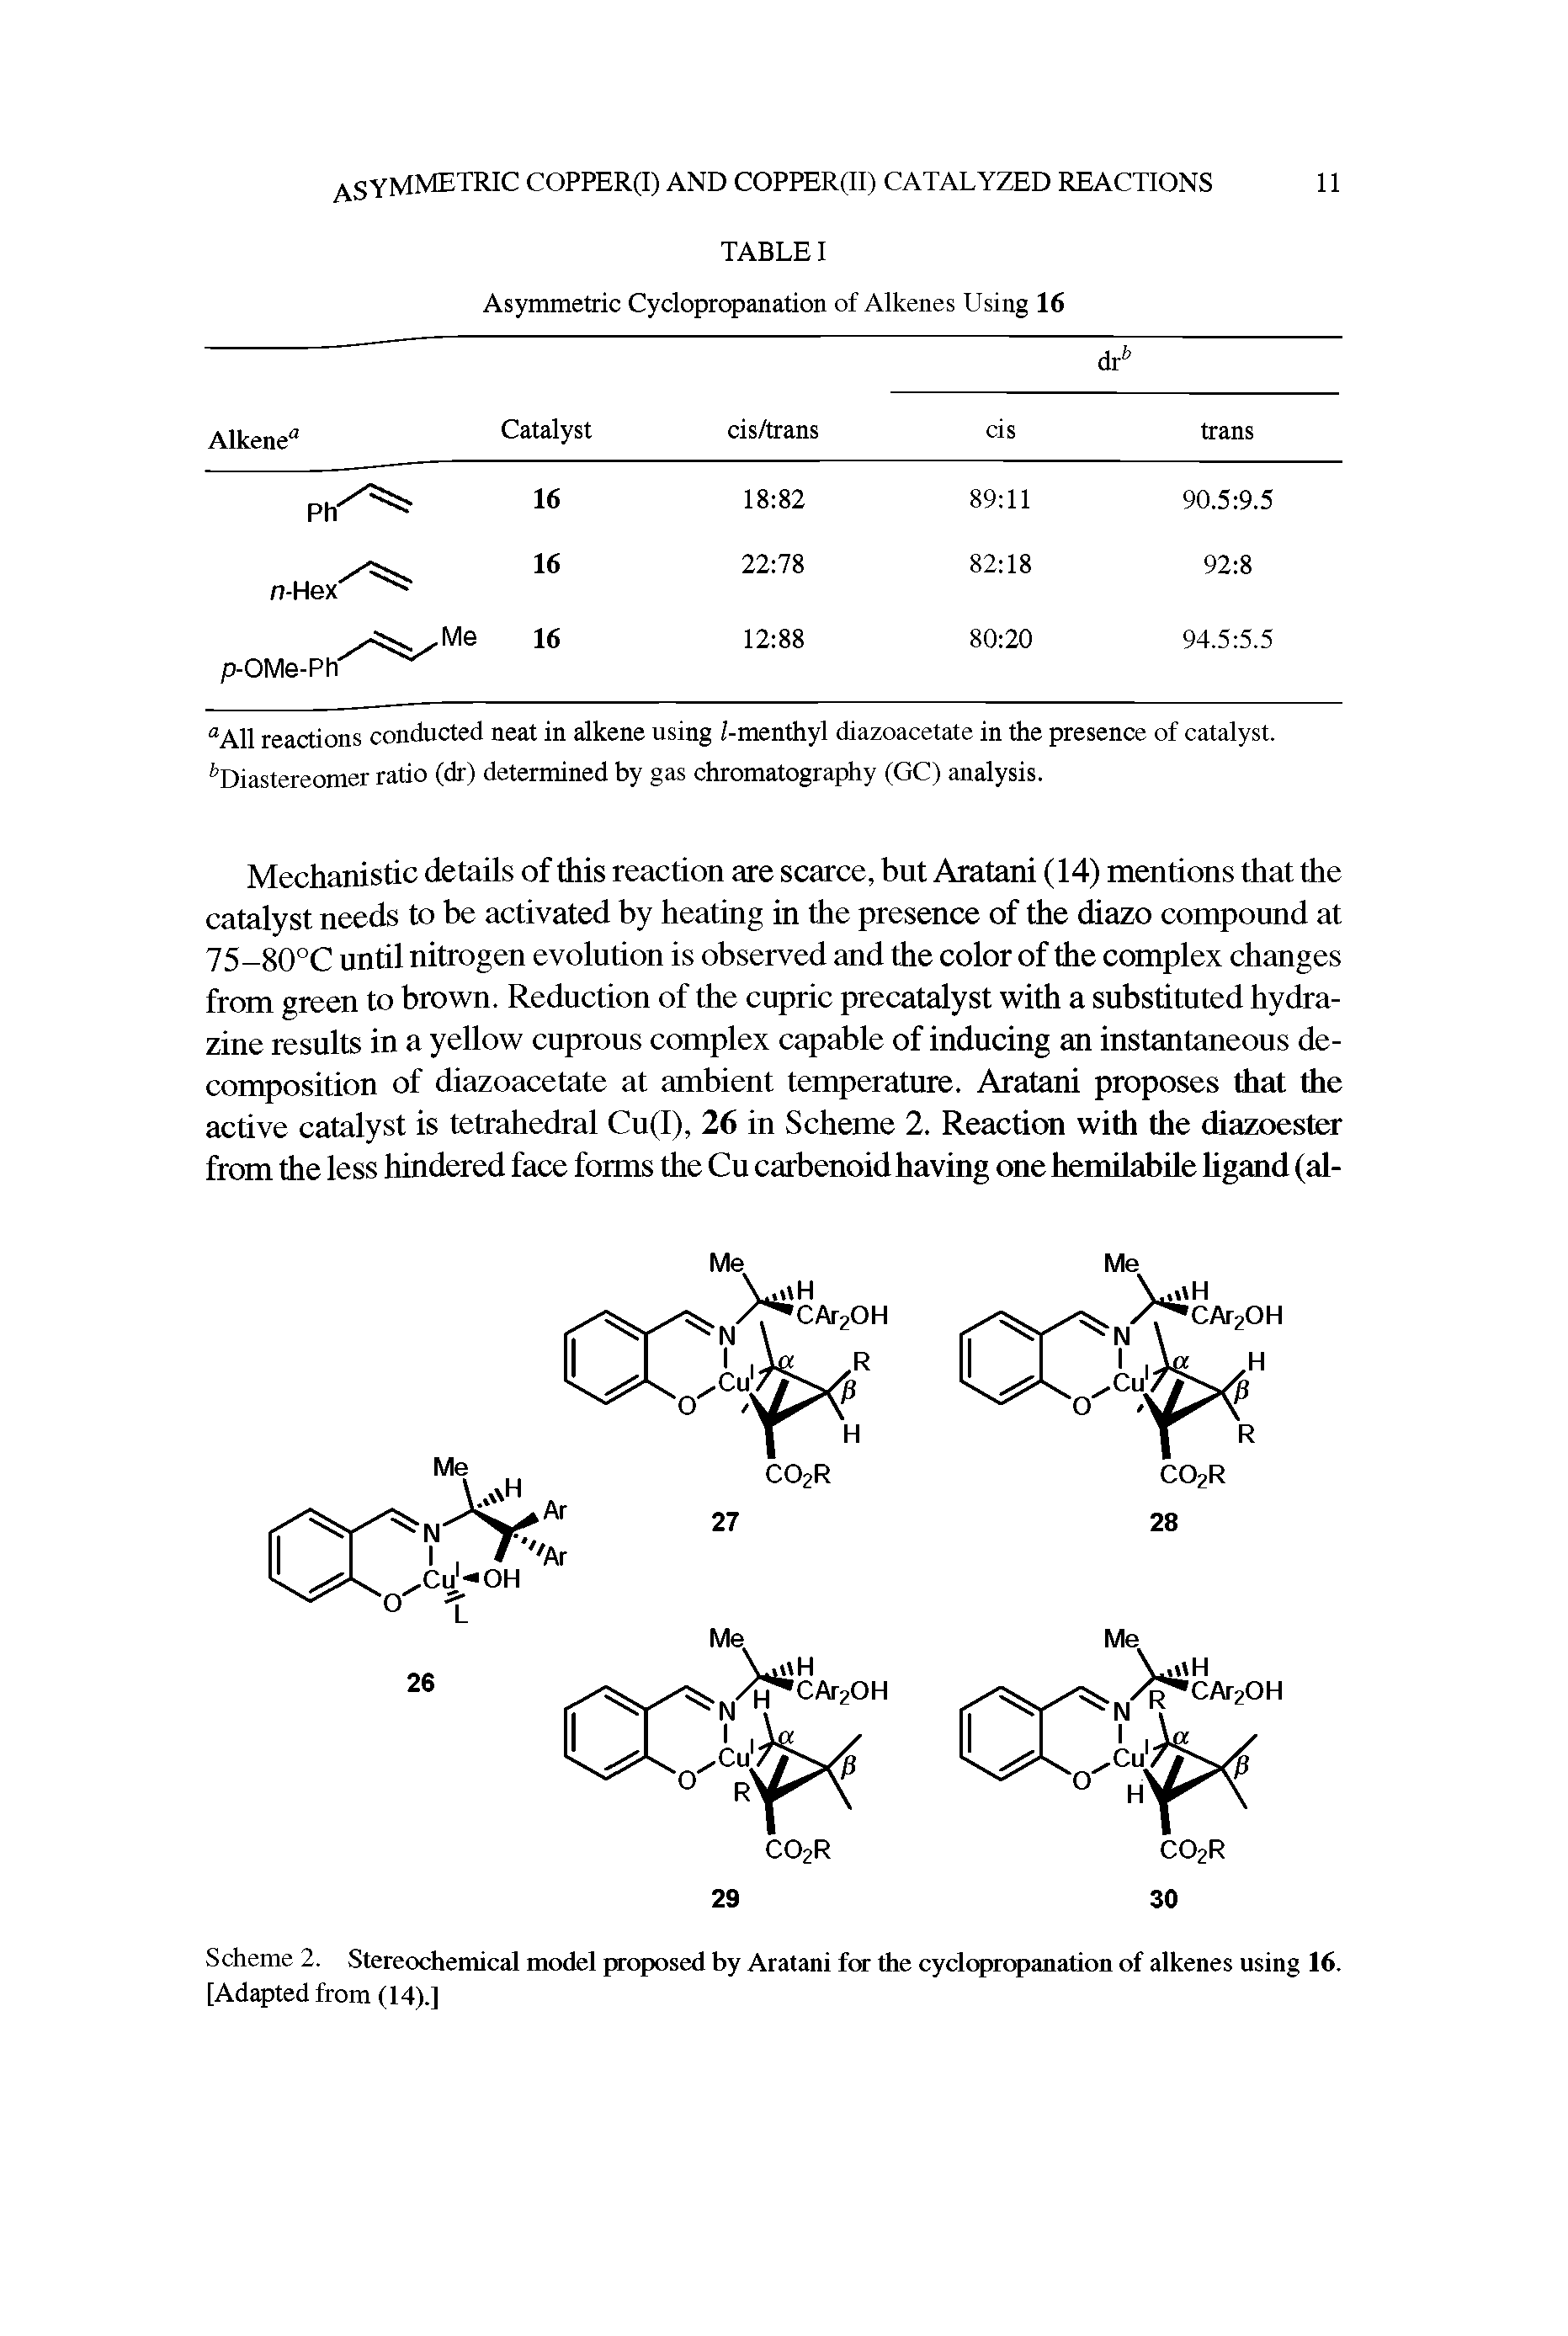 Scheme 2. Stereochemical model proposed by Aratani for the cyclopropanation of alkenes using 16. [Adapted from (14).]...